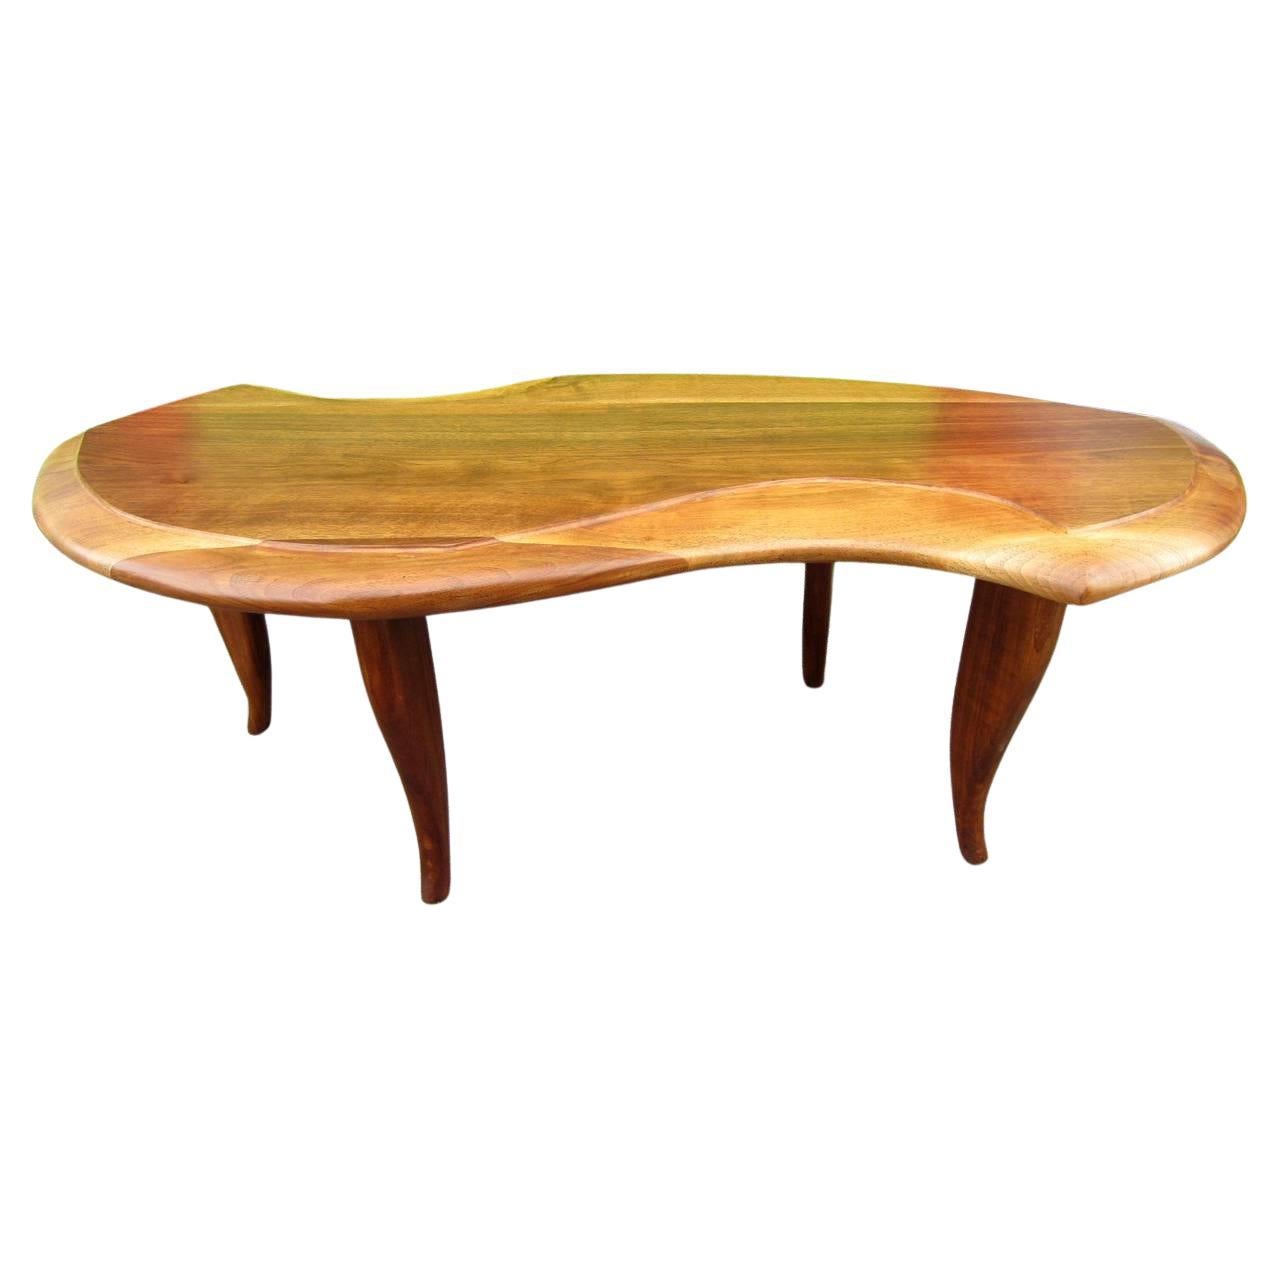 Mid-Century Modern Biomorphic Sculpture Coffee Table by Ray Leach, 1950s For Sale